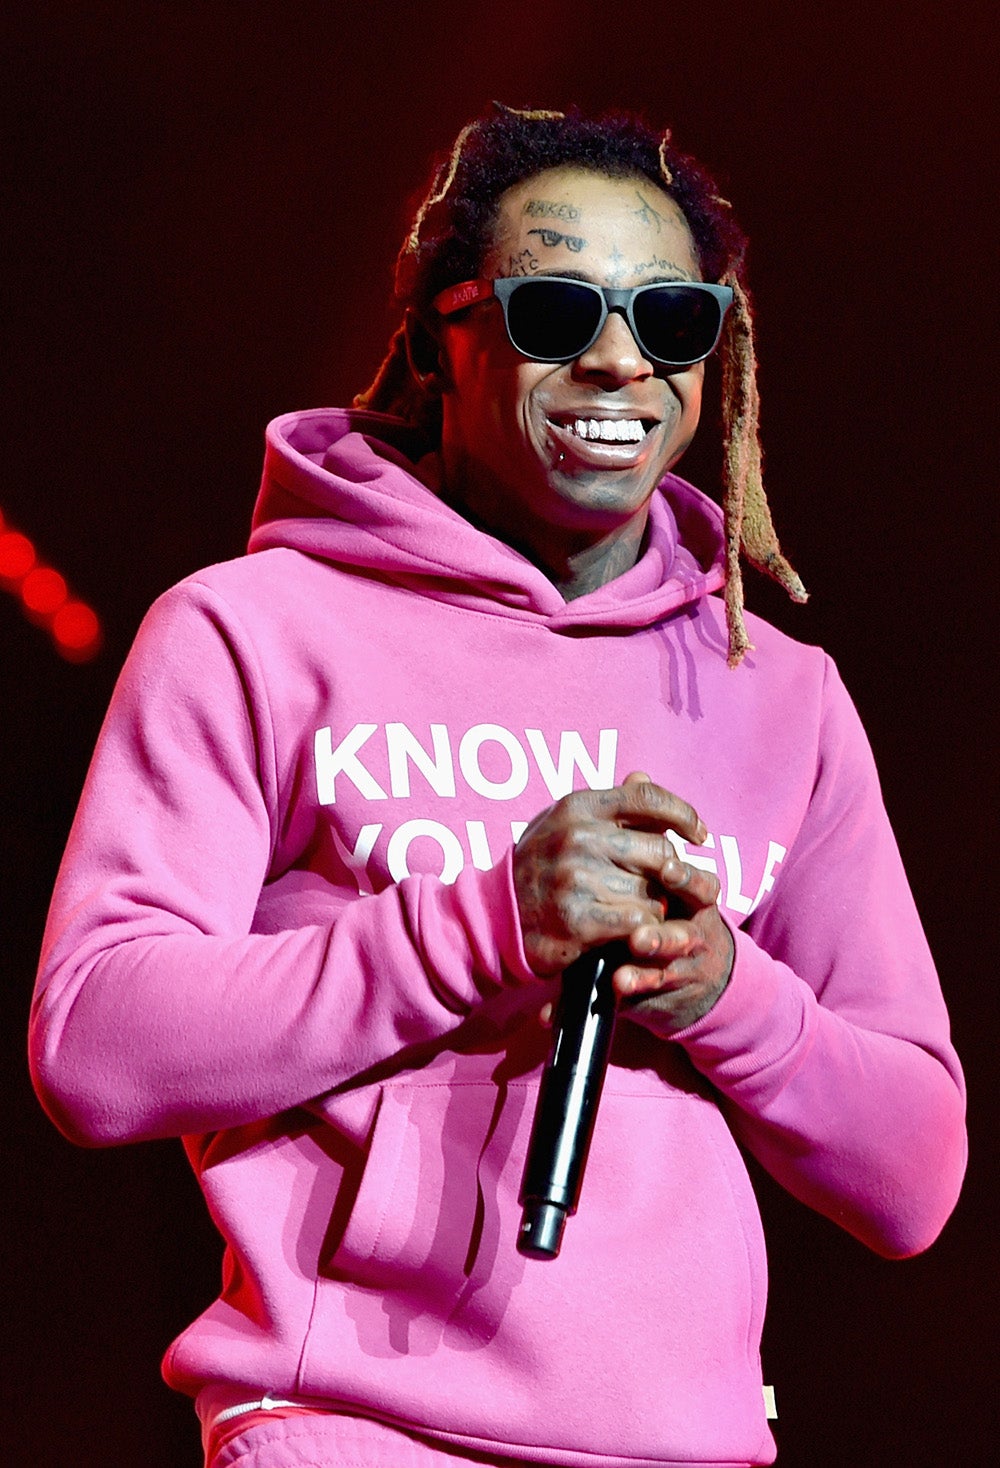 THIS JUST IN: Lil Wayne, A Black Man, Says Black Lives Matter Has Nothing To Do With Him
